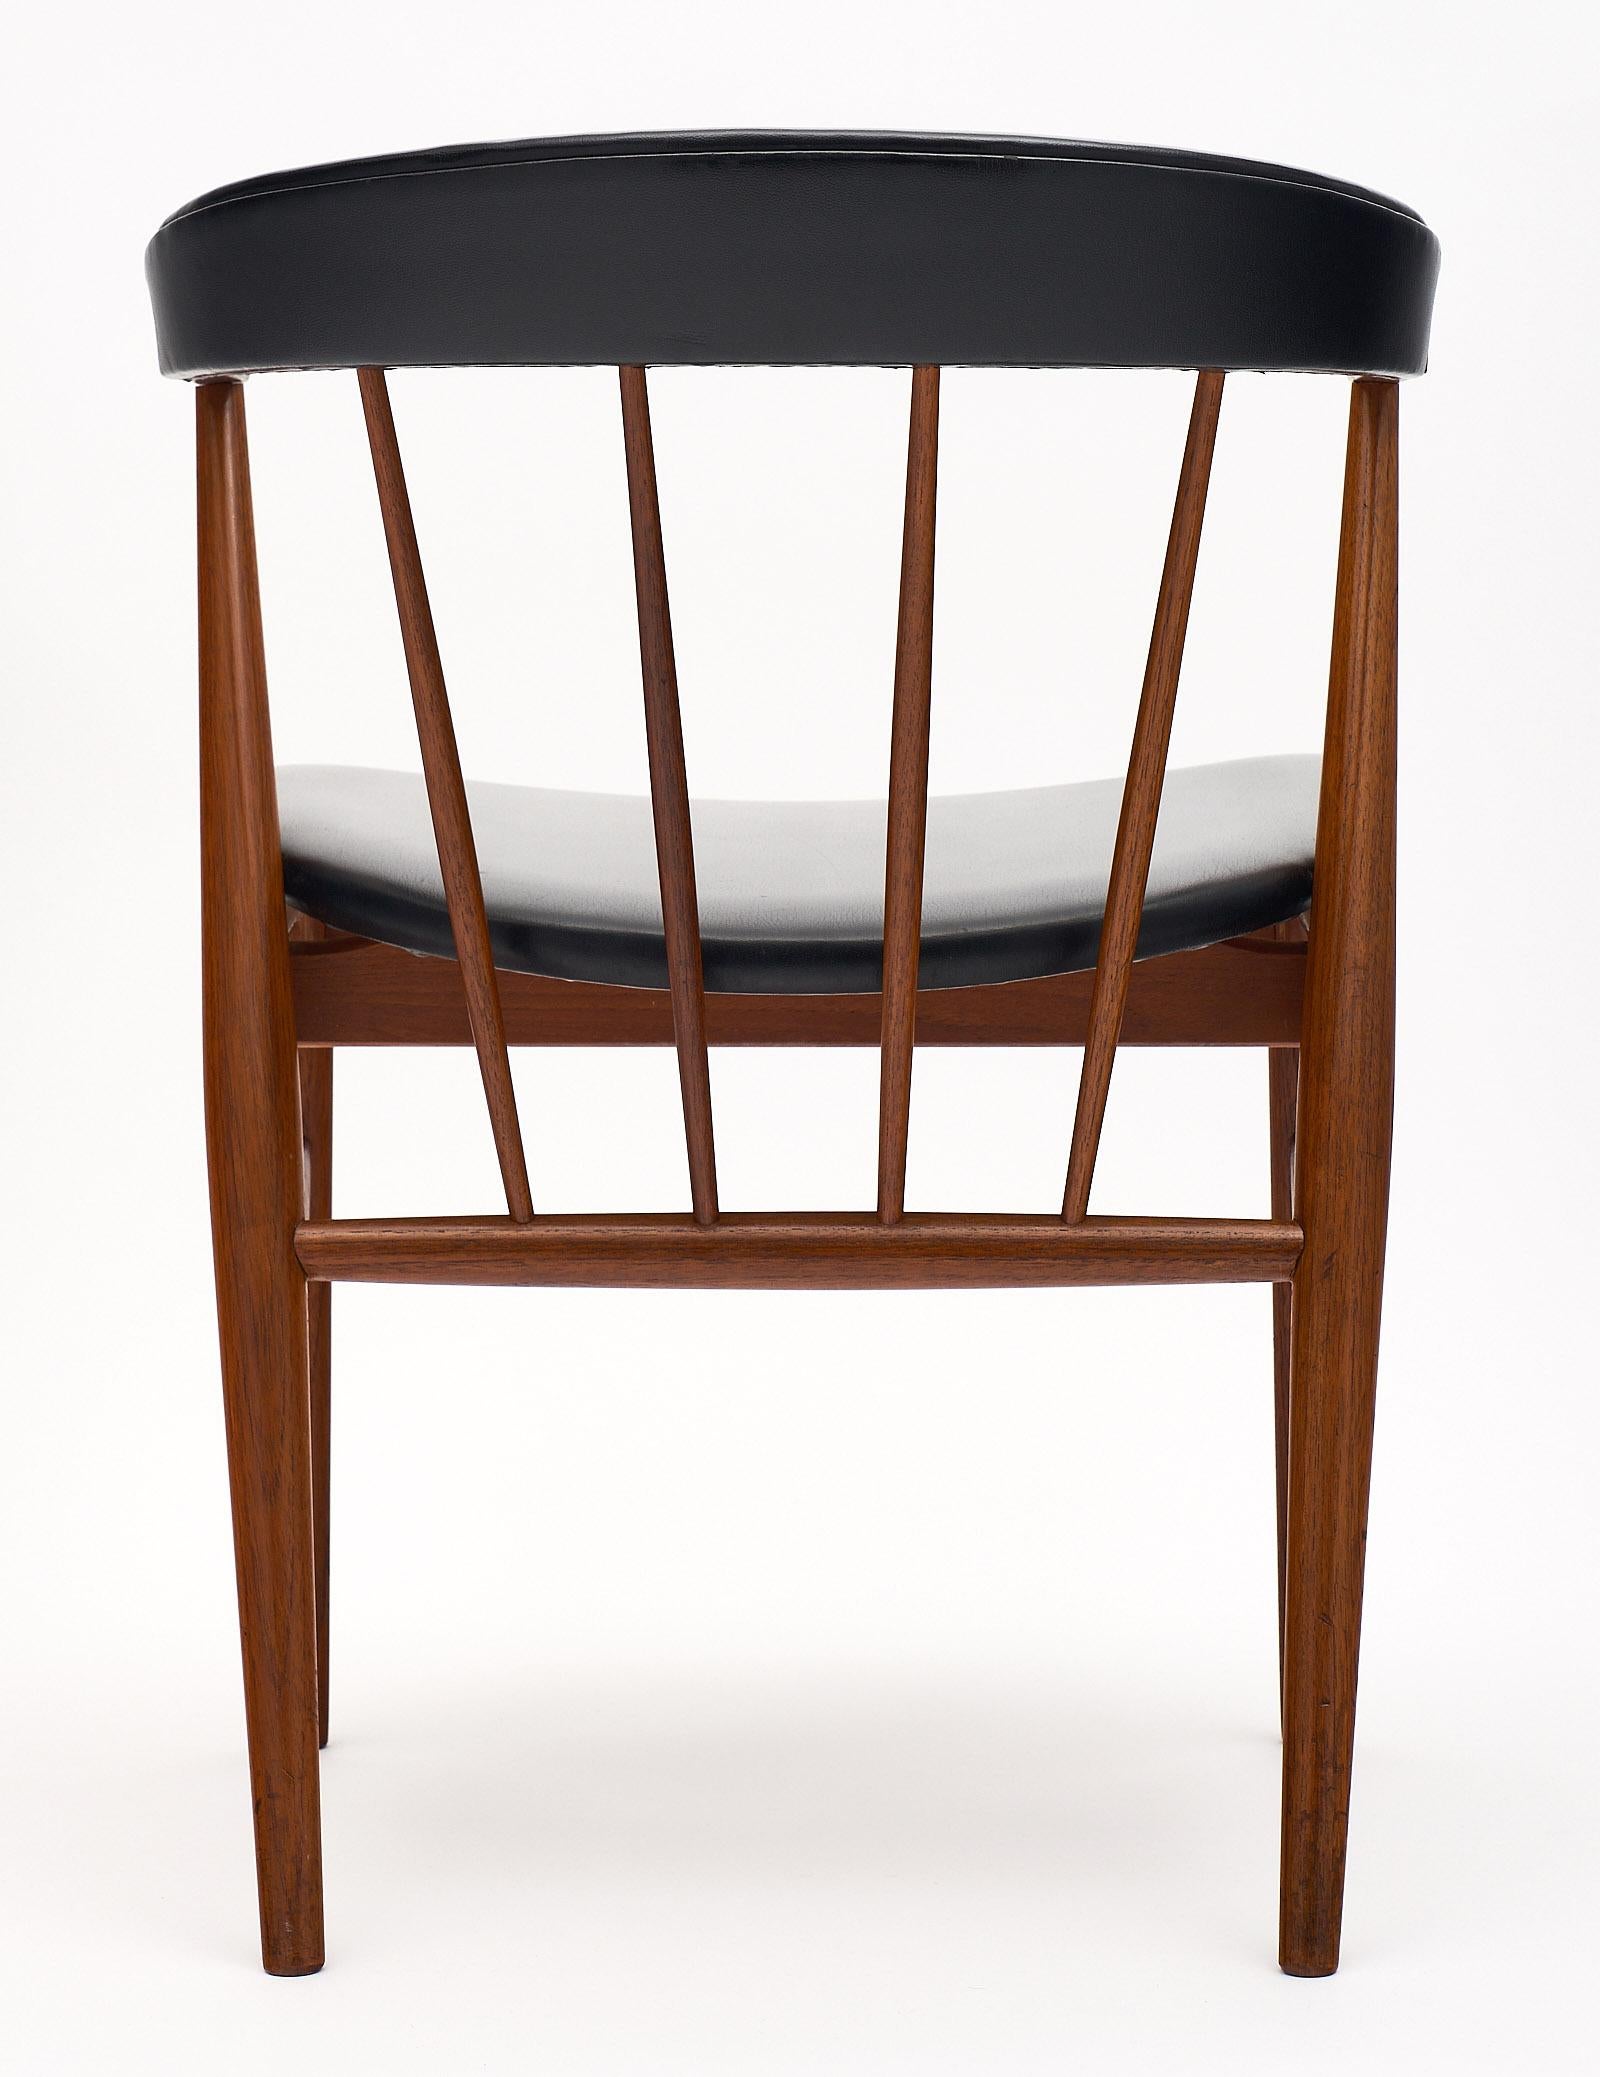 Mid-20th Century Sibast No. 8 Set of Five Danish Chairs For Sale